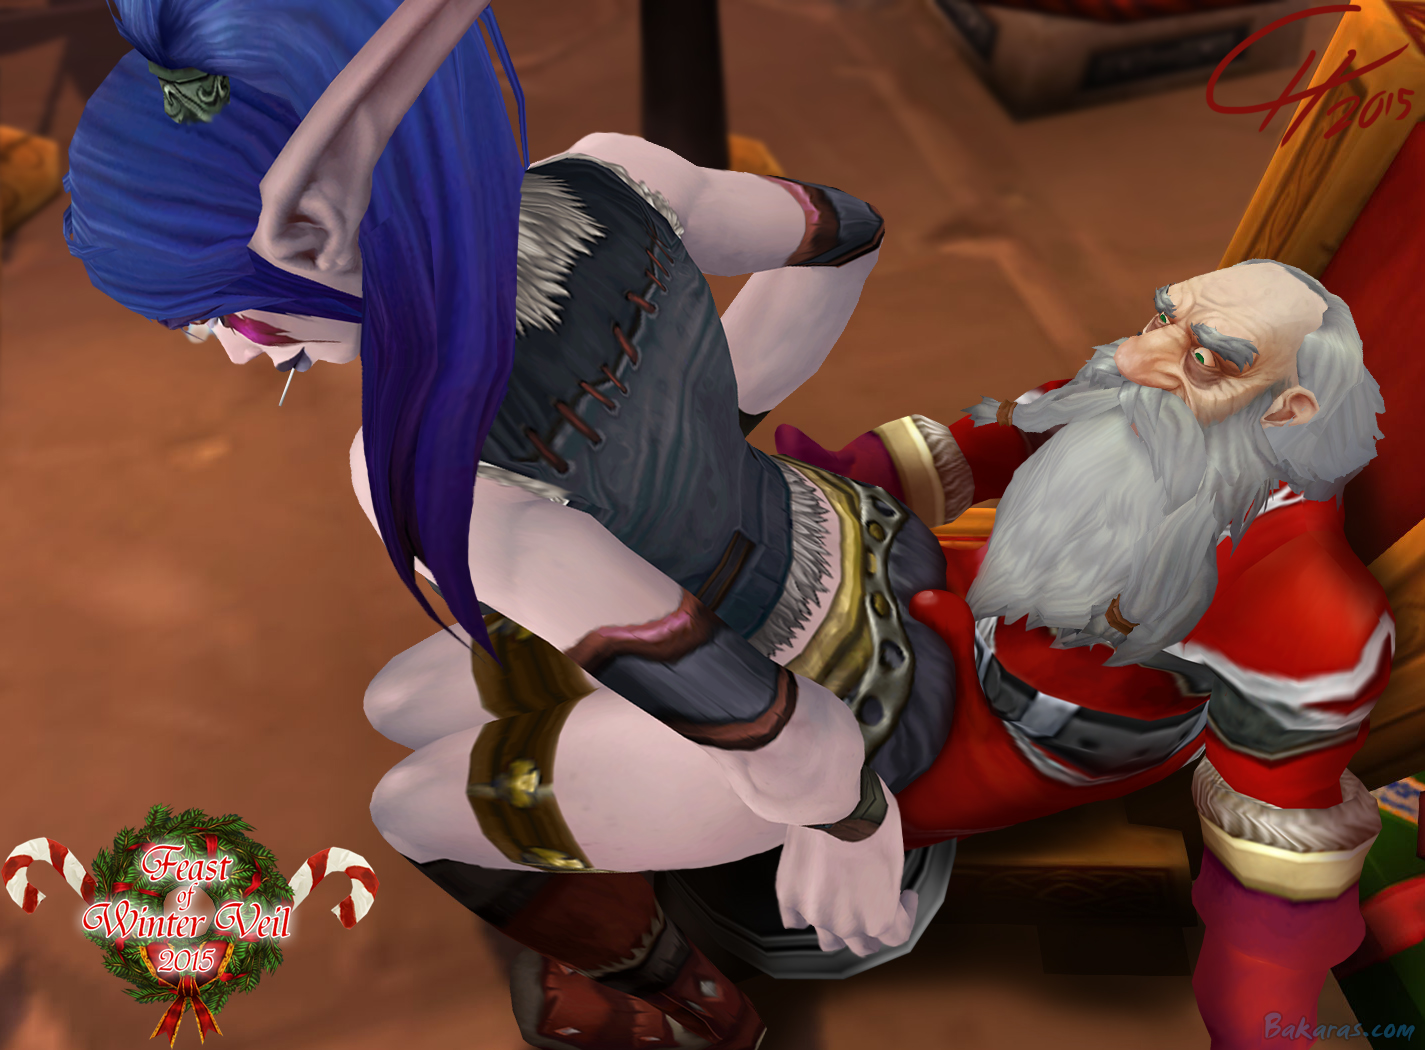 Greatfather Winter's Hard Package [Dwarf/Nelf/Tease]
Every year, Greatfather Winter arrives to Ironforge to listen what boys and girls
want as gifts during Winters Veil, some even bring treats for old bearded one.
Keywords: Nelf;OC;Dwarf;Tease